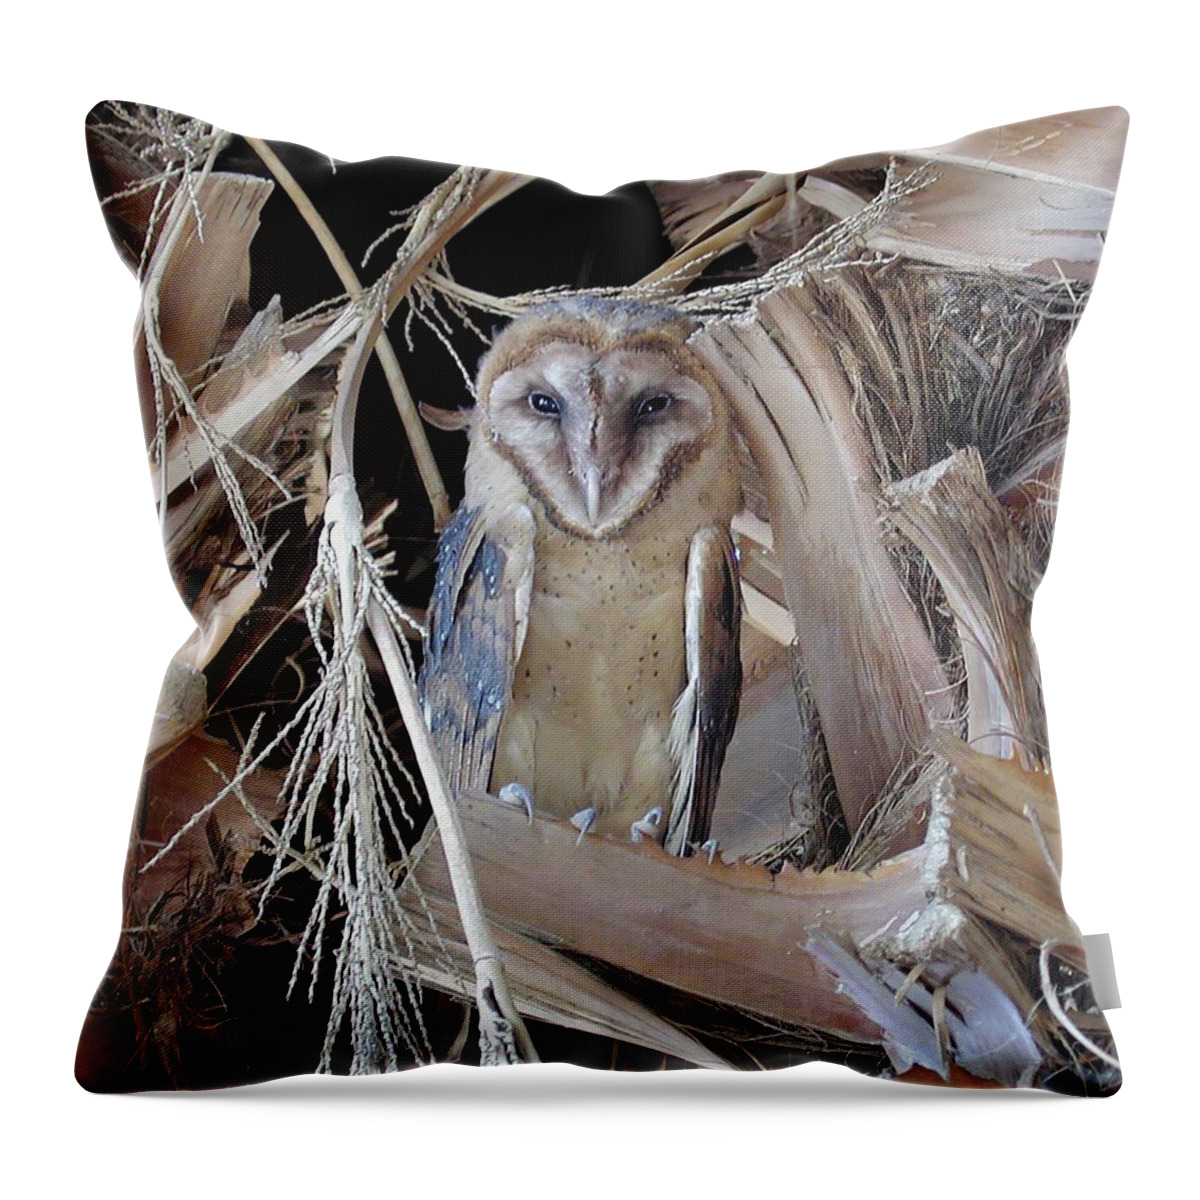 Barn Owl Throw Pillow featuring the photograph Barn Owl by Perry Hoffman